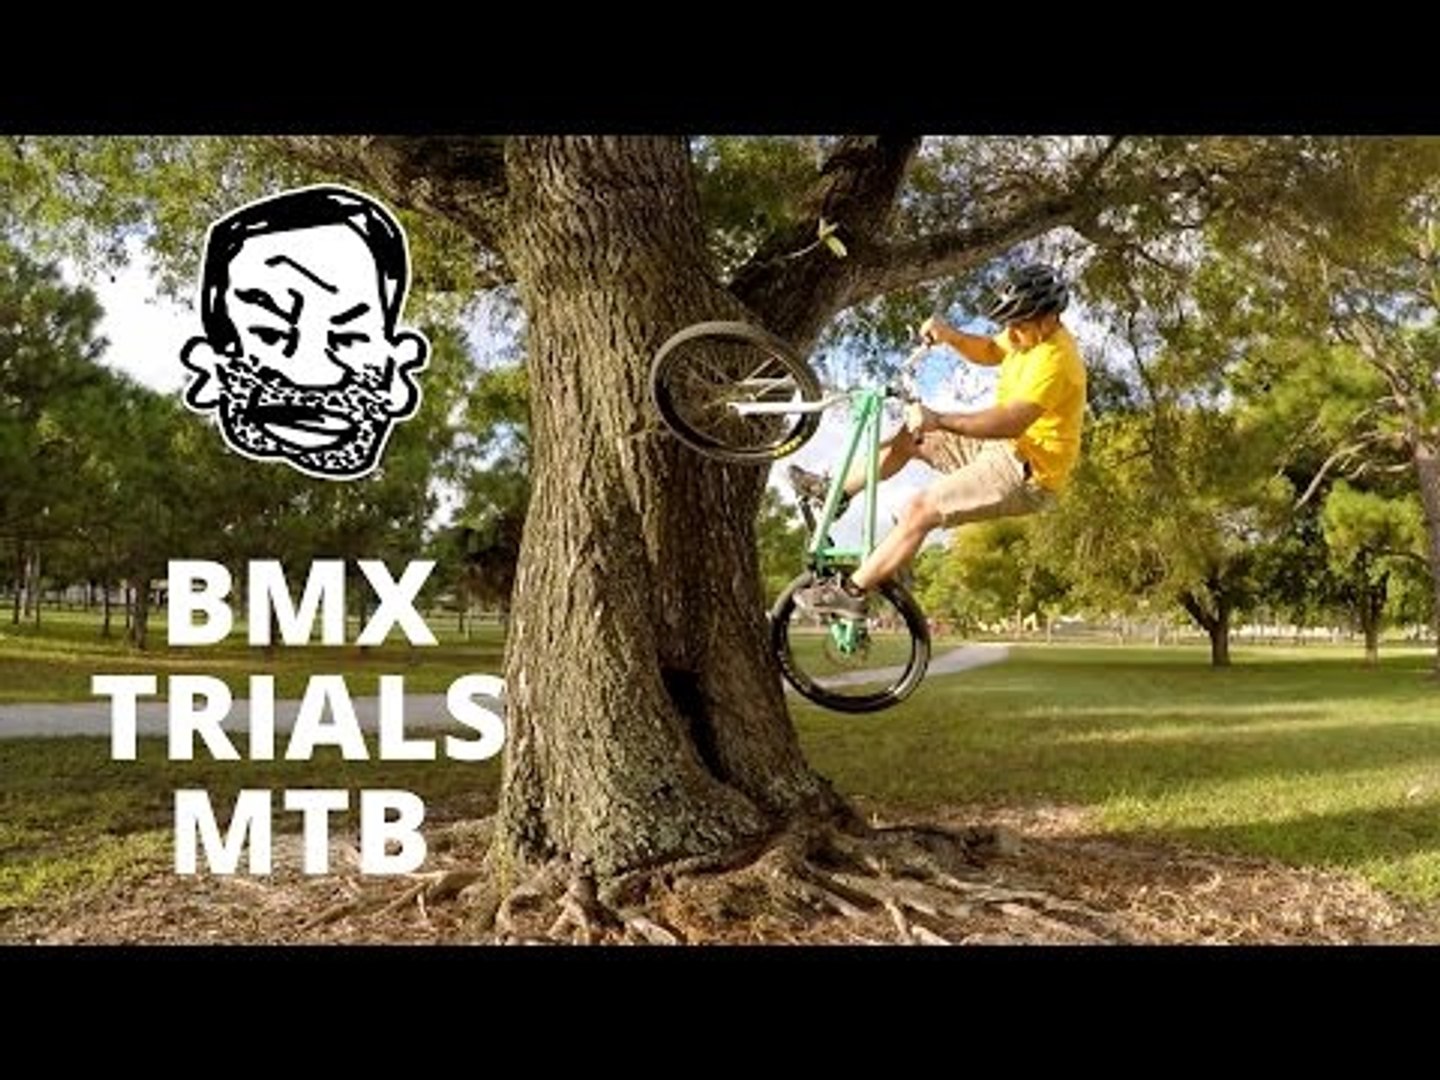 MTB, BMX, & Trials Bikes - Which to choose? - video Dailymotion